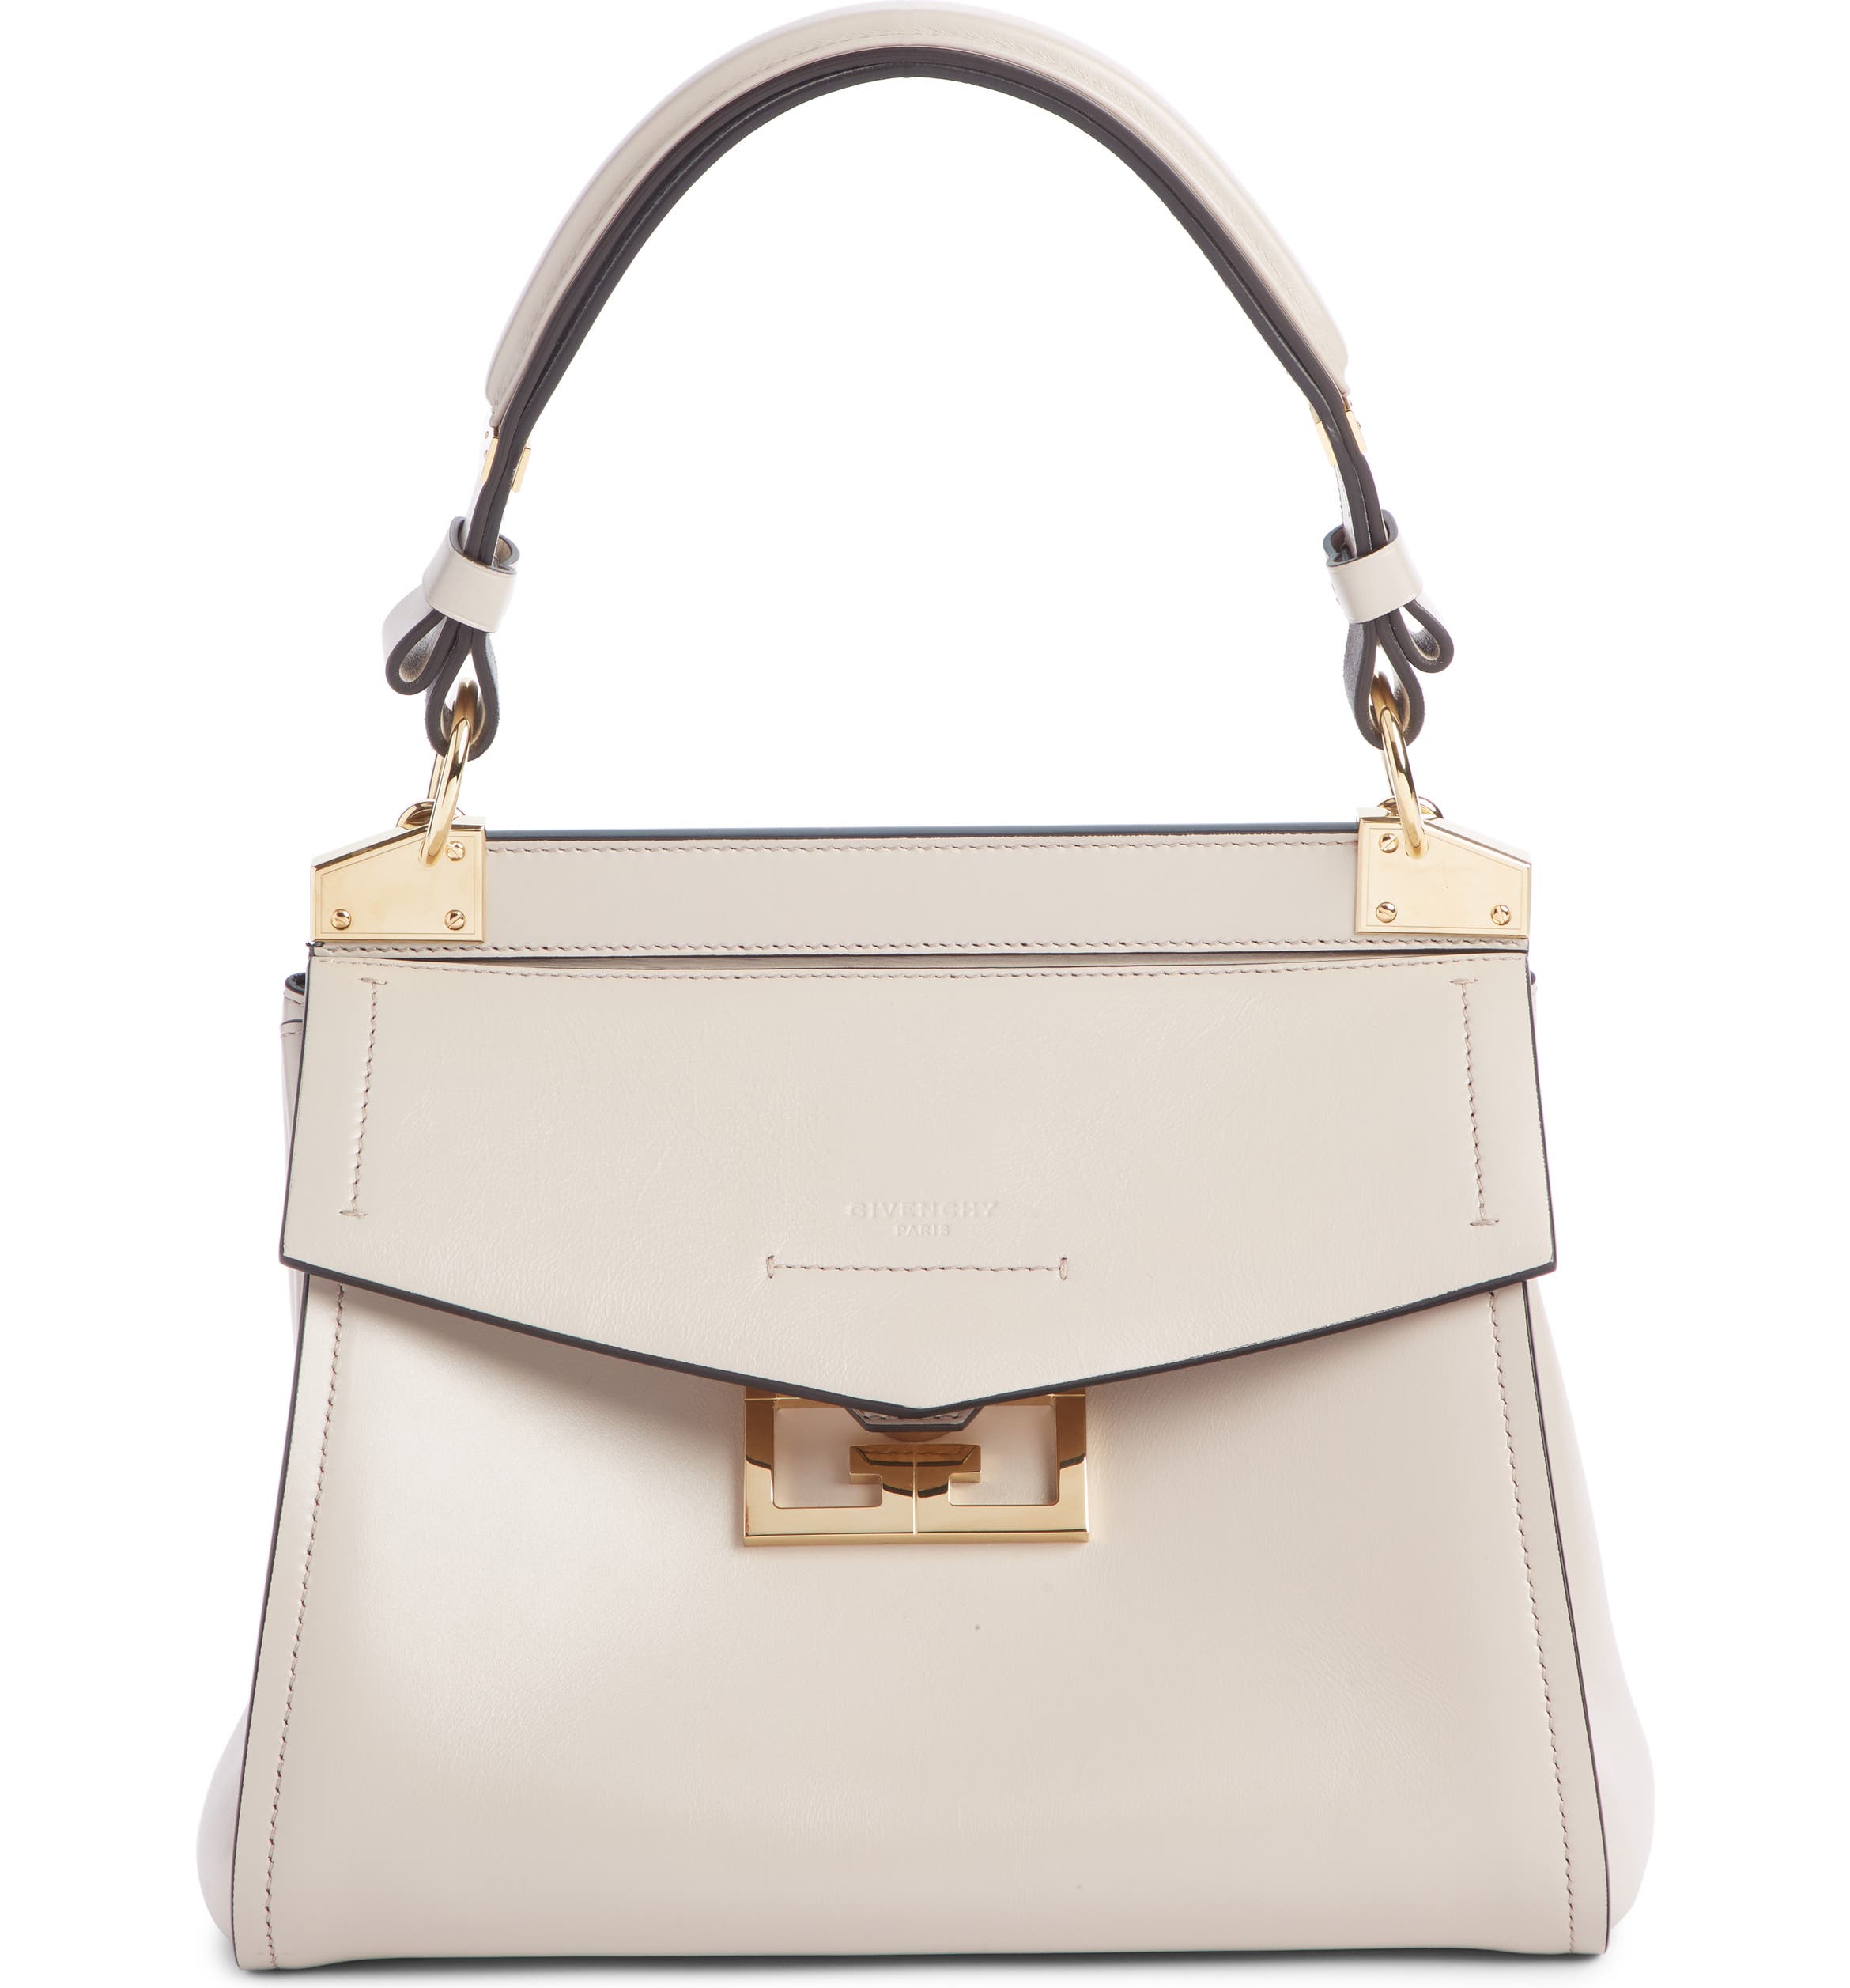 Givenchy Small Mystic Leather Satchel | Nordstrom